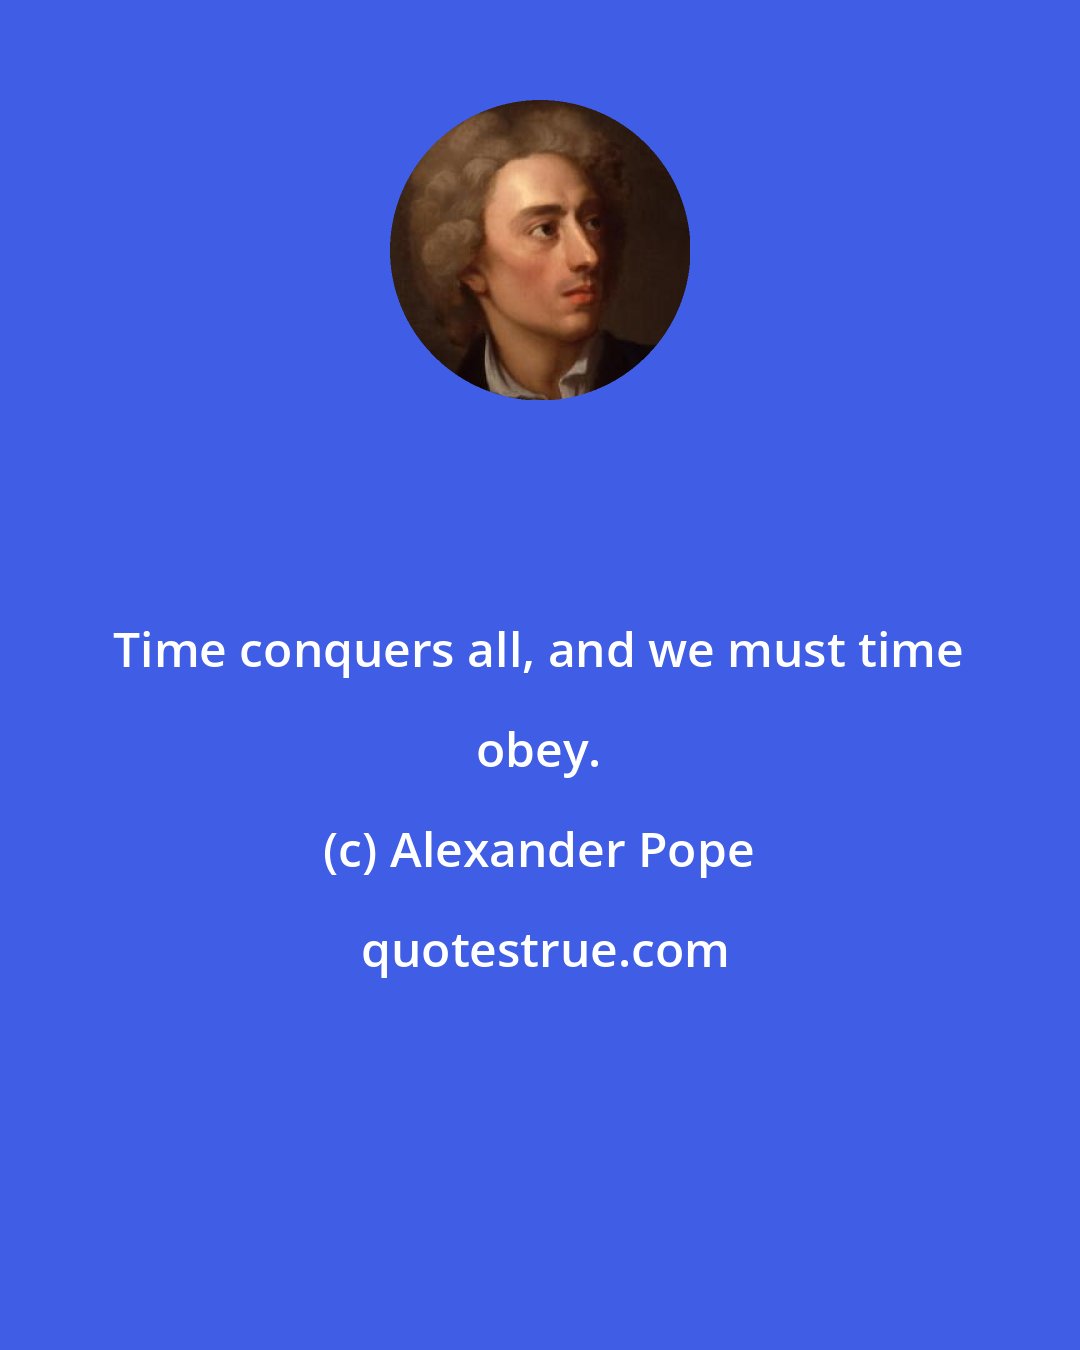 Alexander Pope: Time conquers all, and we must time obey.